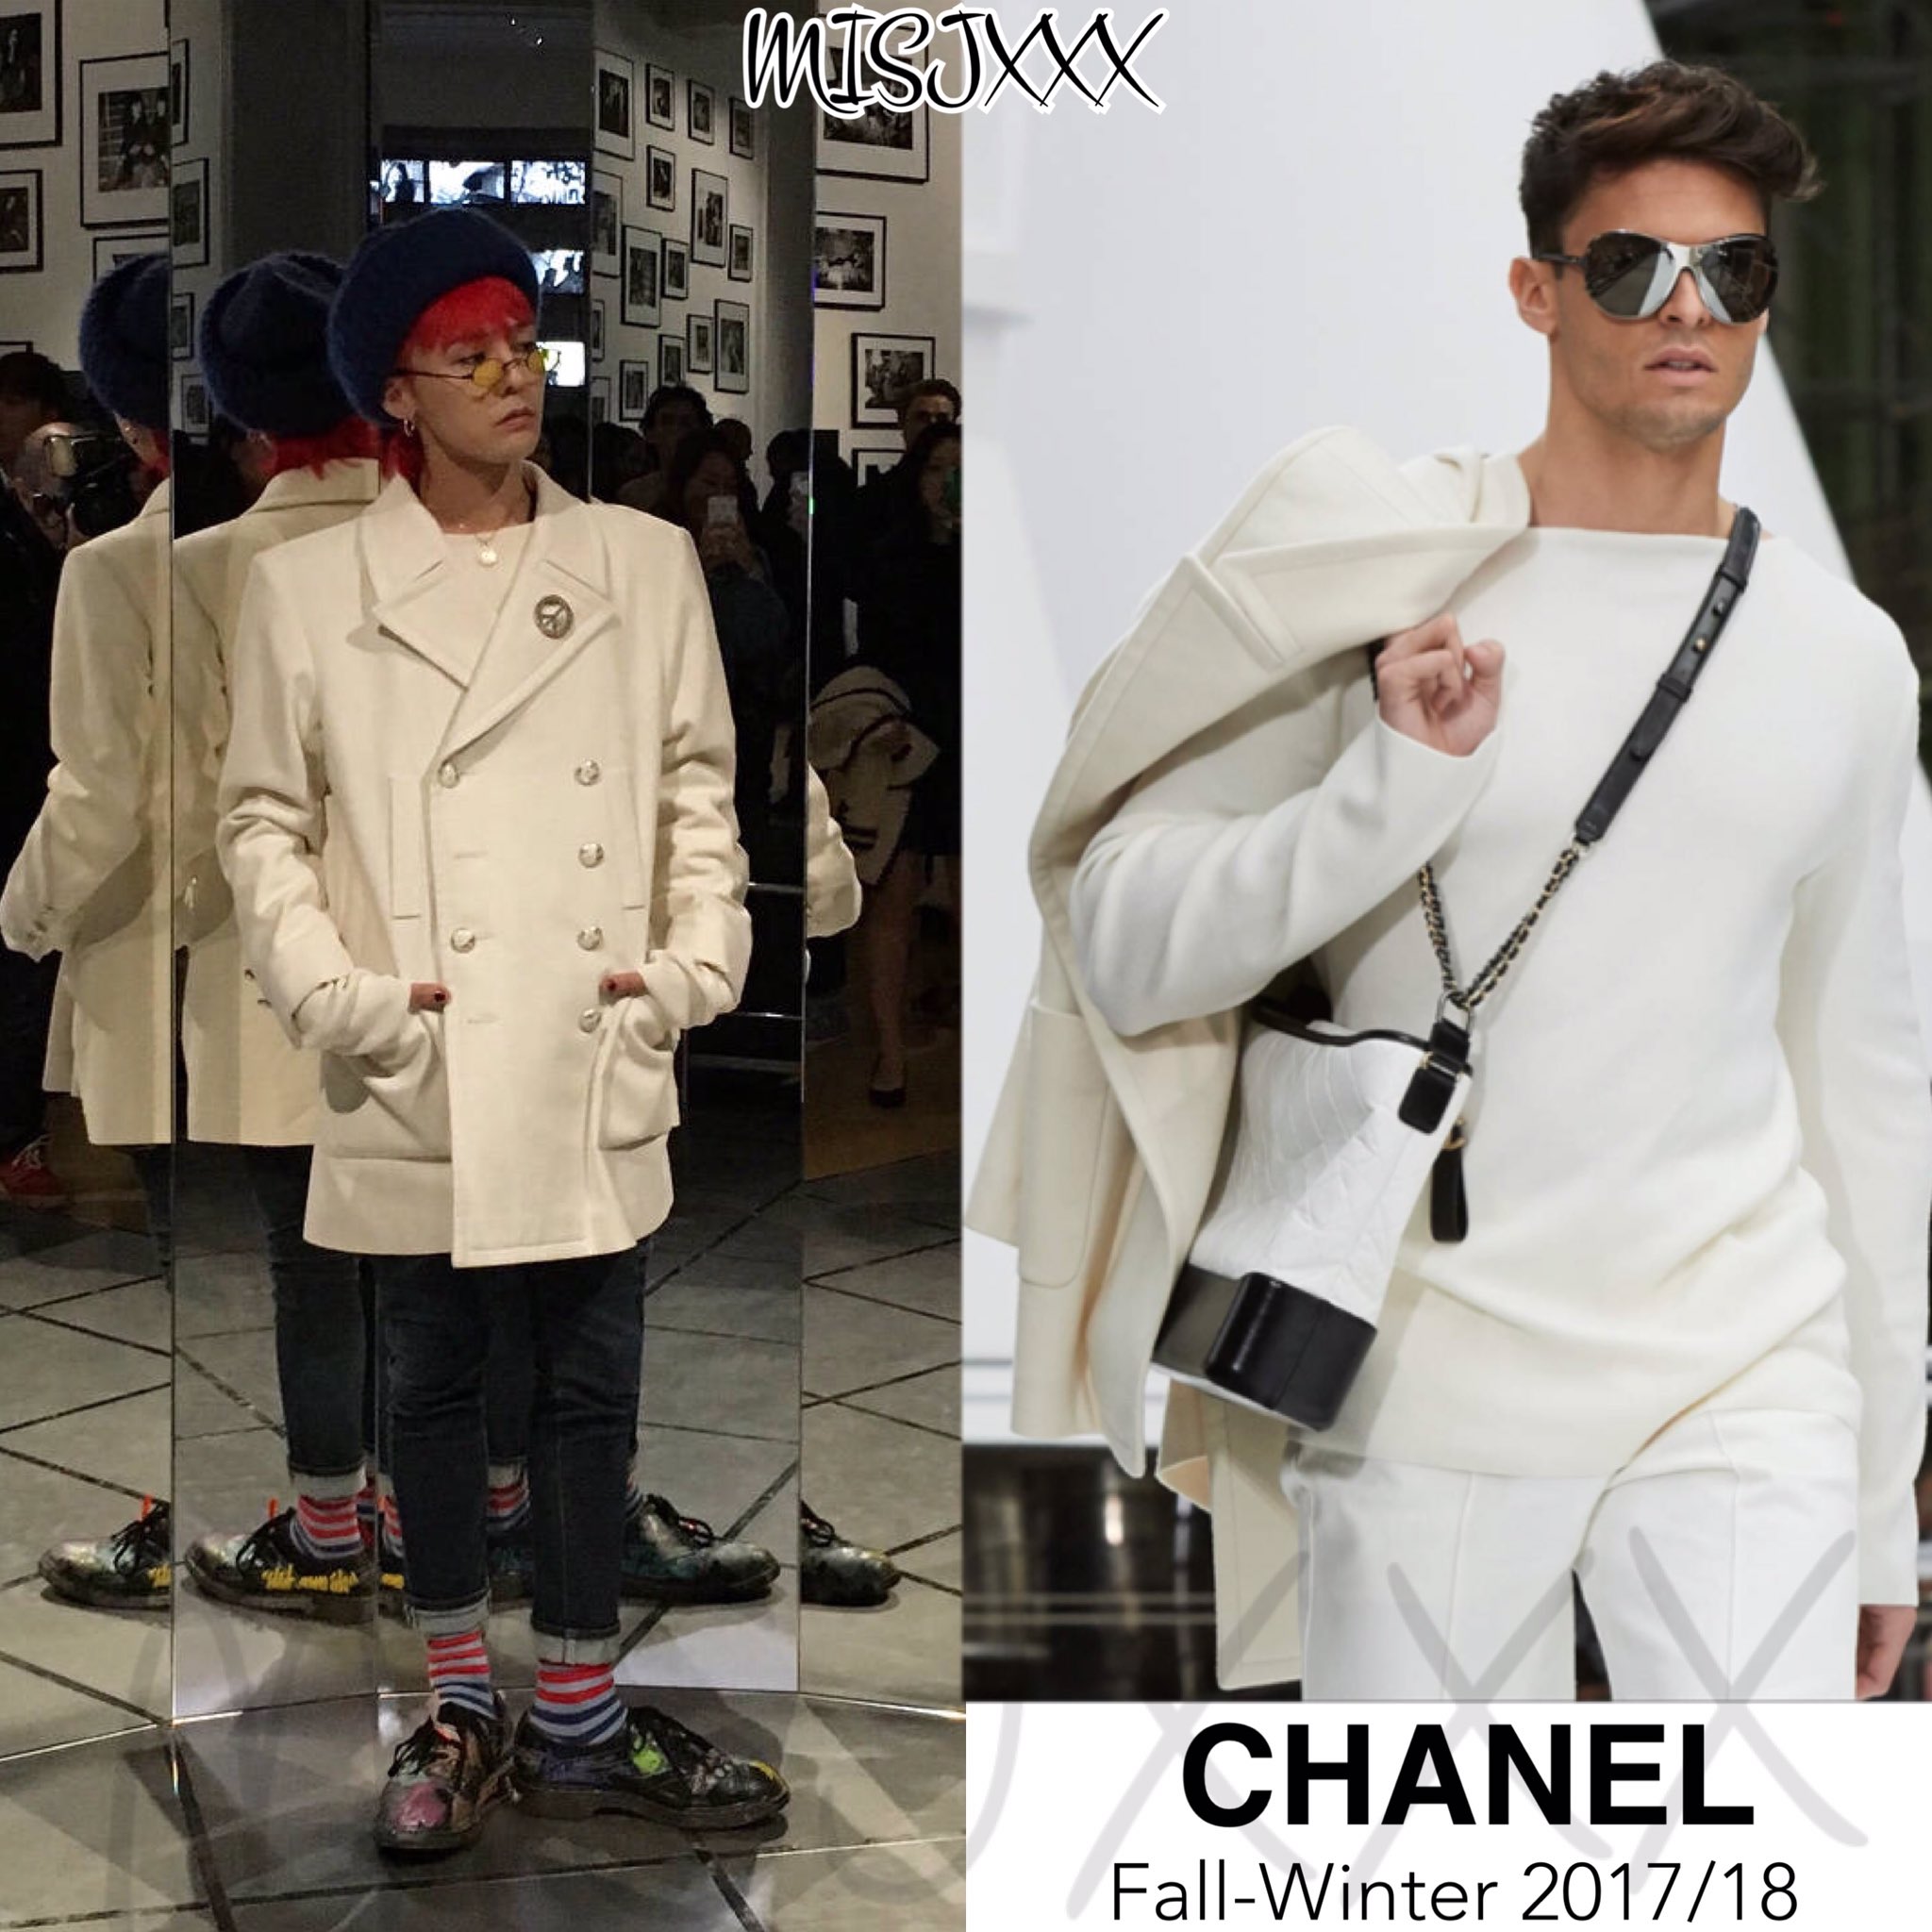 GDSTYLE on X: #GDStyle 👉#Chanel Fall-Winter 2017/18—Men's CABAN